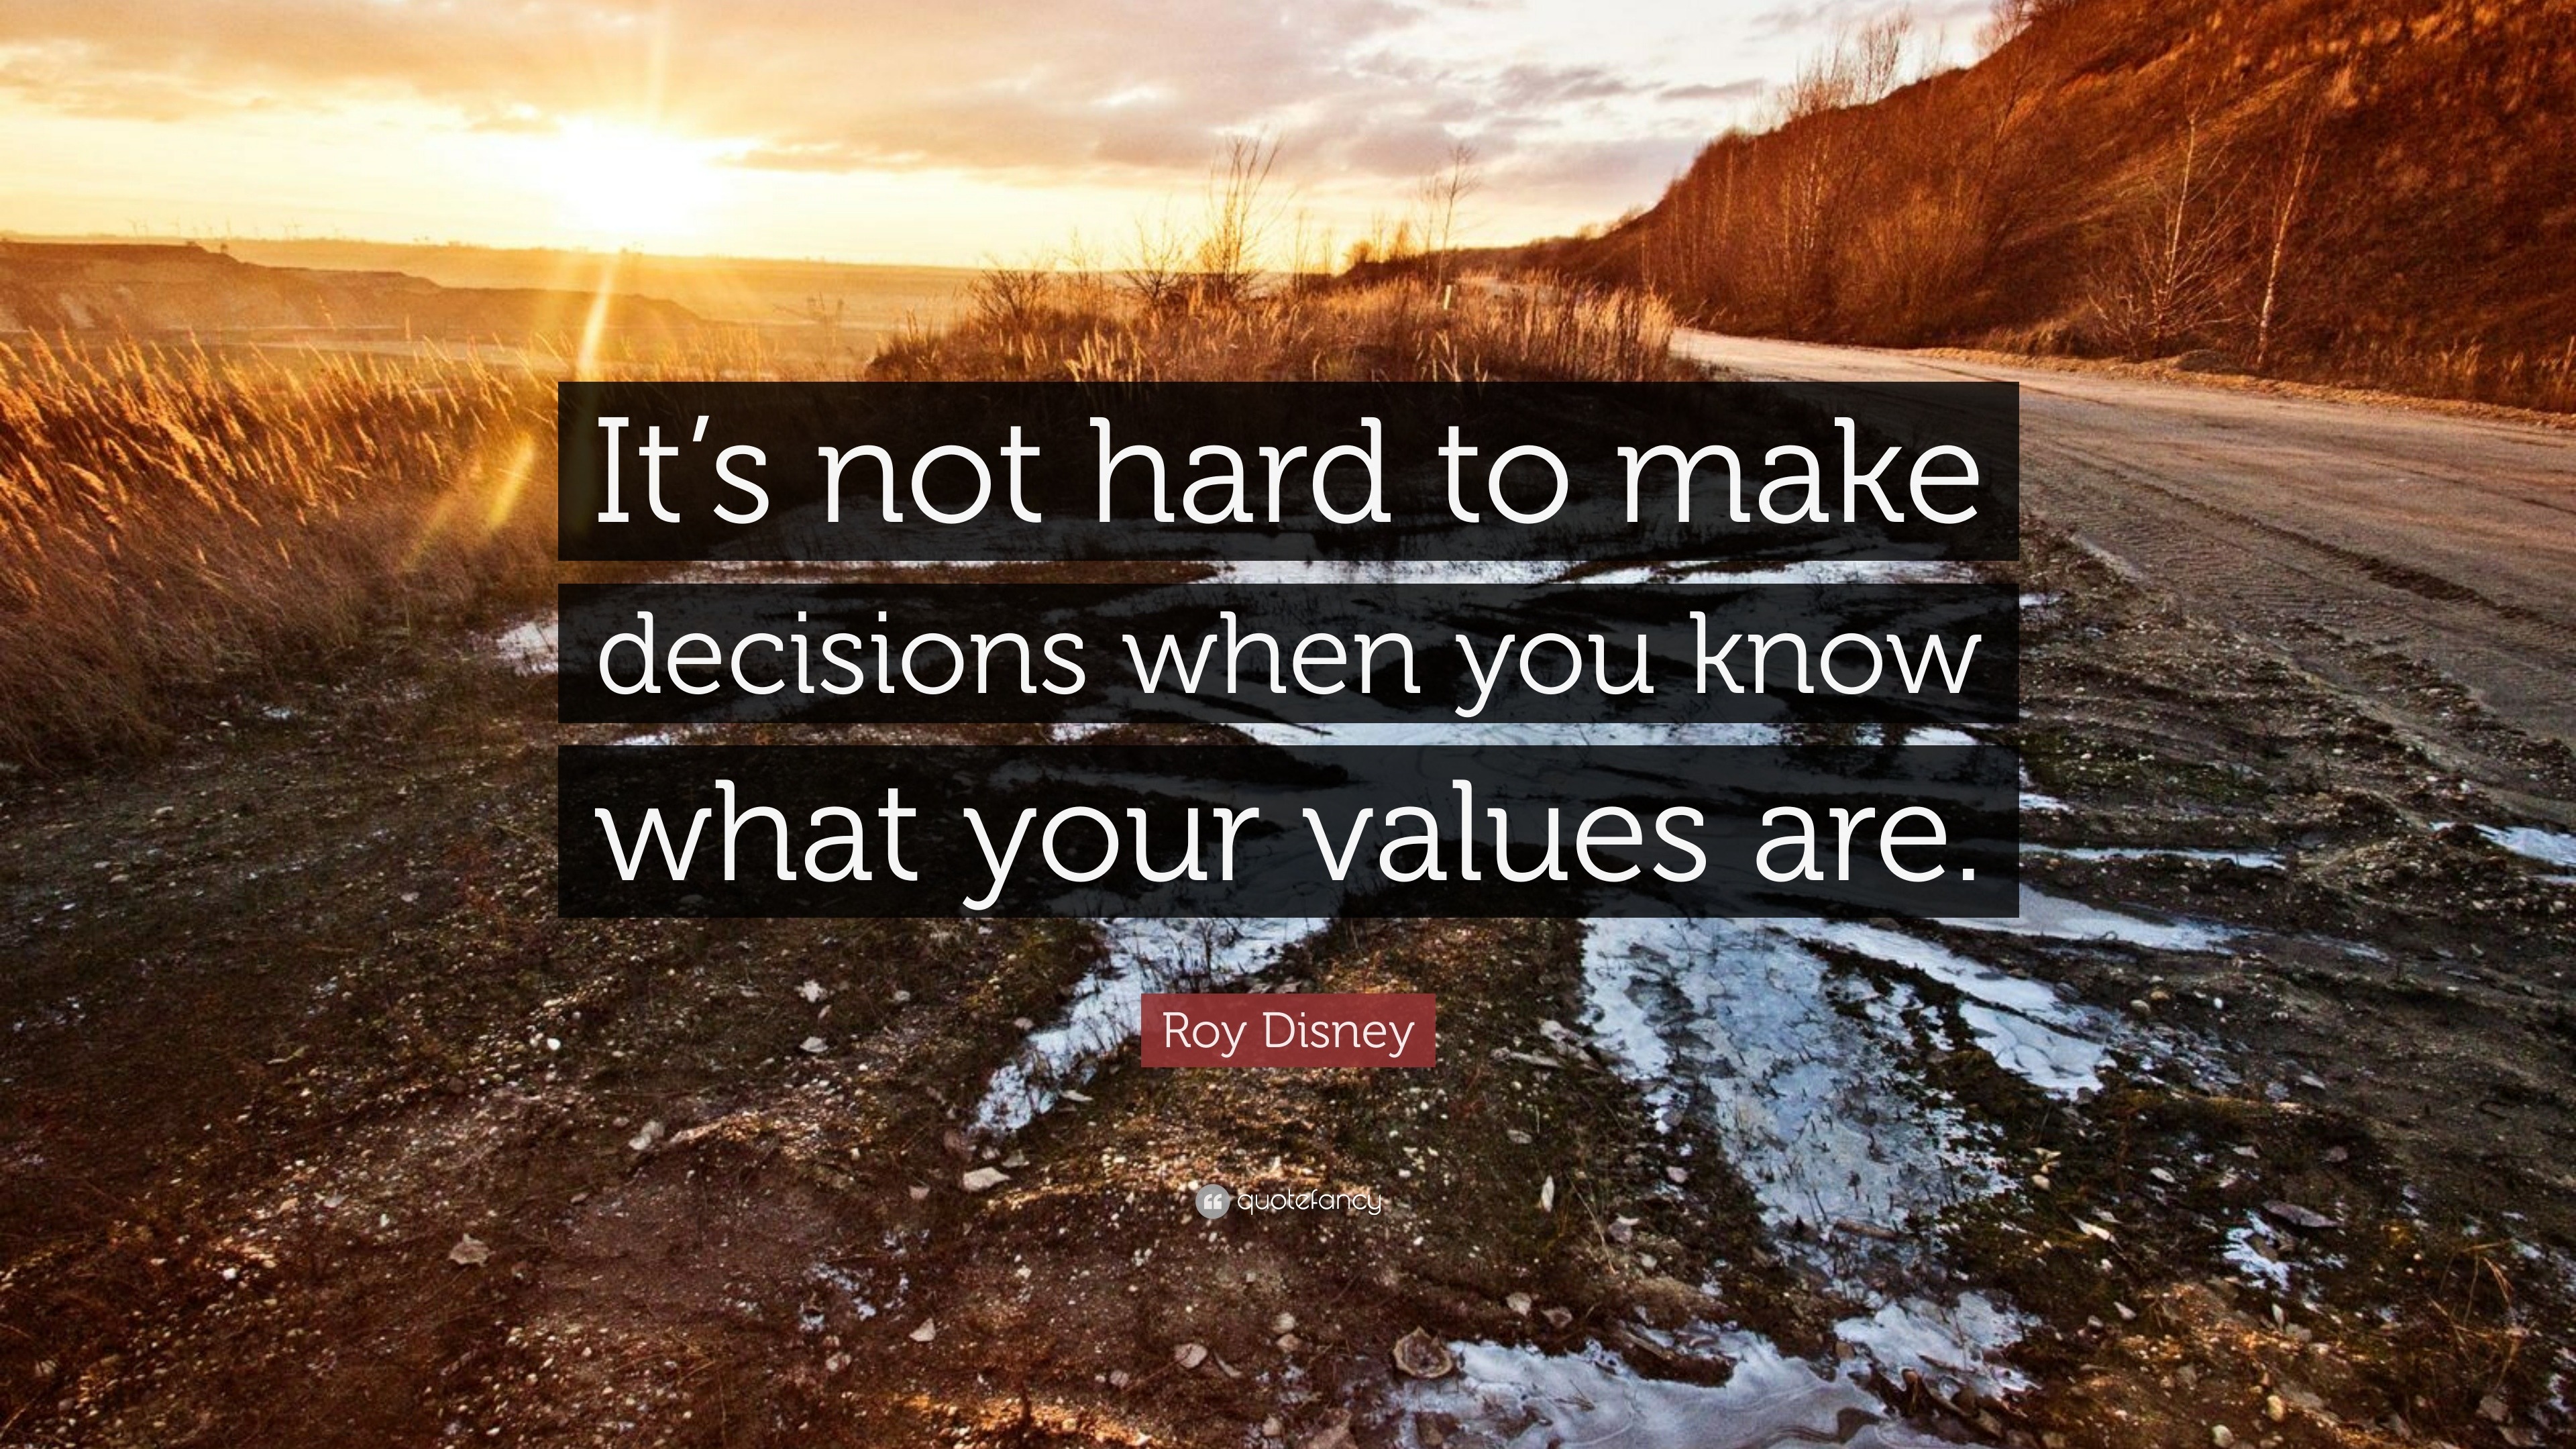 Roy Disney Quote: "It's not hard to make decisions when you know what ...